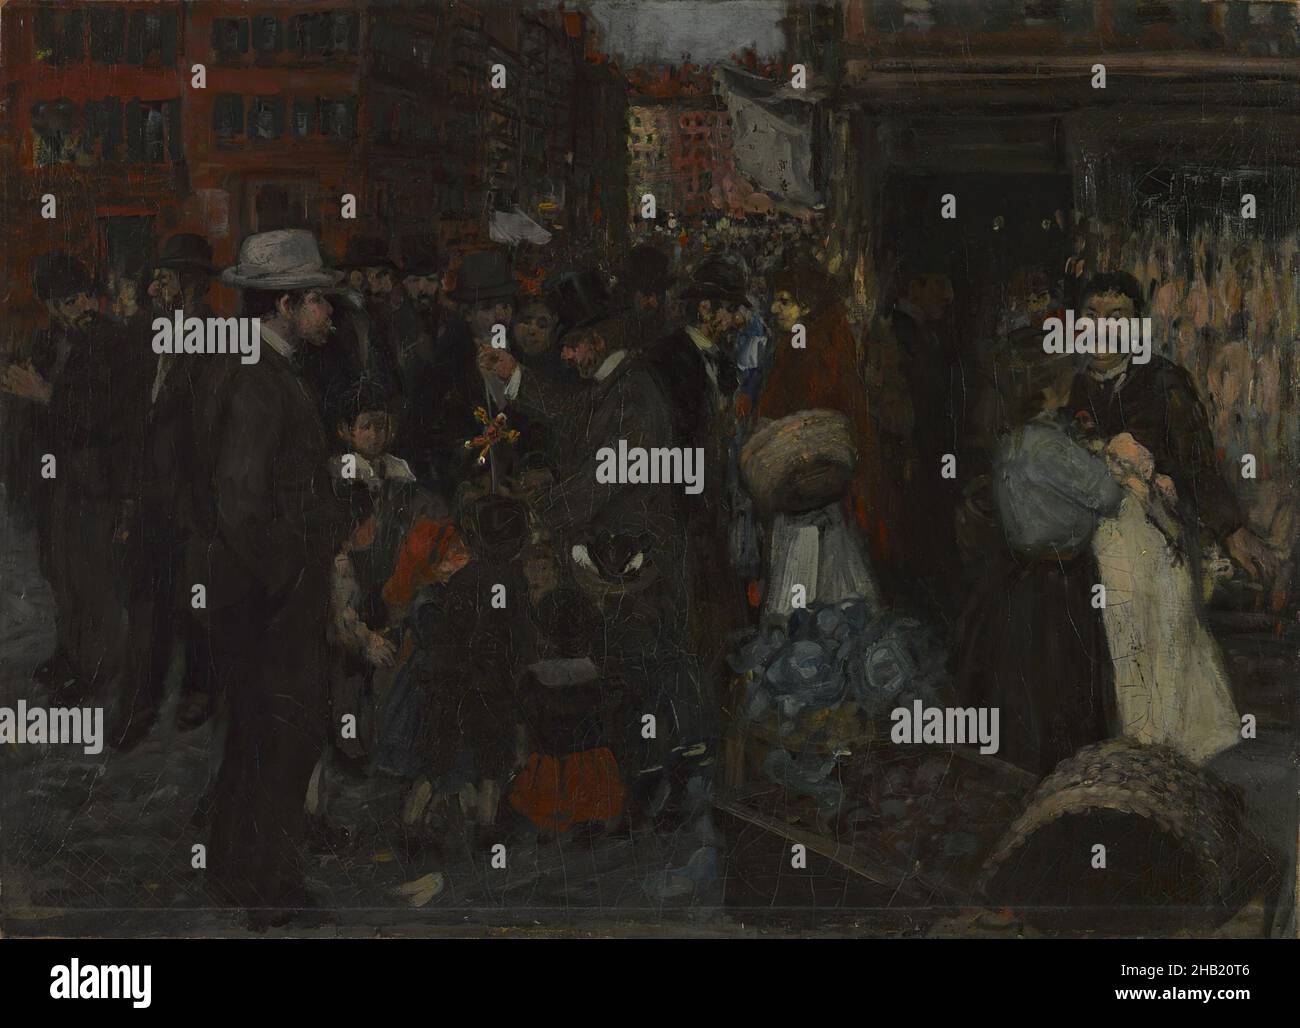 Street Scene, Hester Street, George Benjamin Luks, American, 1867-1933, Oil on canvas, 1905, 25 13/16 x 35 7/8 in., 65.5 x 91.1 cm, American Realism, Americana, Ash Can School, ashcan, Basket, blue, Buildings, Busy, Children, colorful, commerce, Crowds, daily life, historic lower east side, historic New York City, immigrant, Immigration, Jewish history, lower east side, Manhattan, Market, melting pot, old New York, painting, People, red, shopping, storefronts, Street Scene, The Eight, urban, urban scene Stock Photo